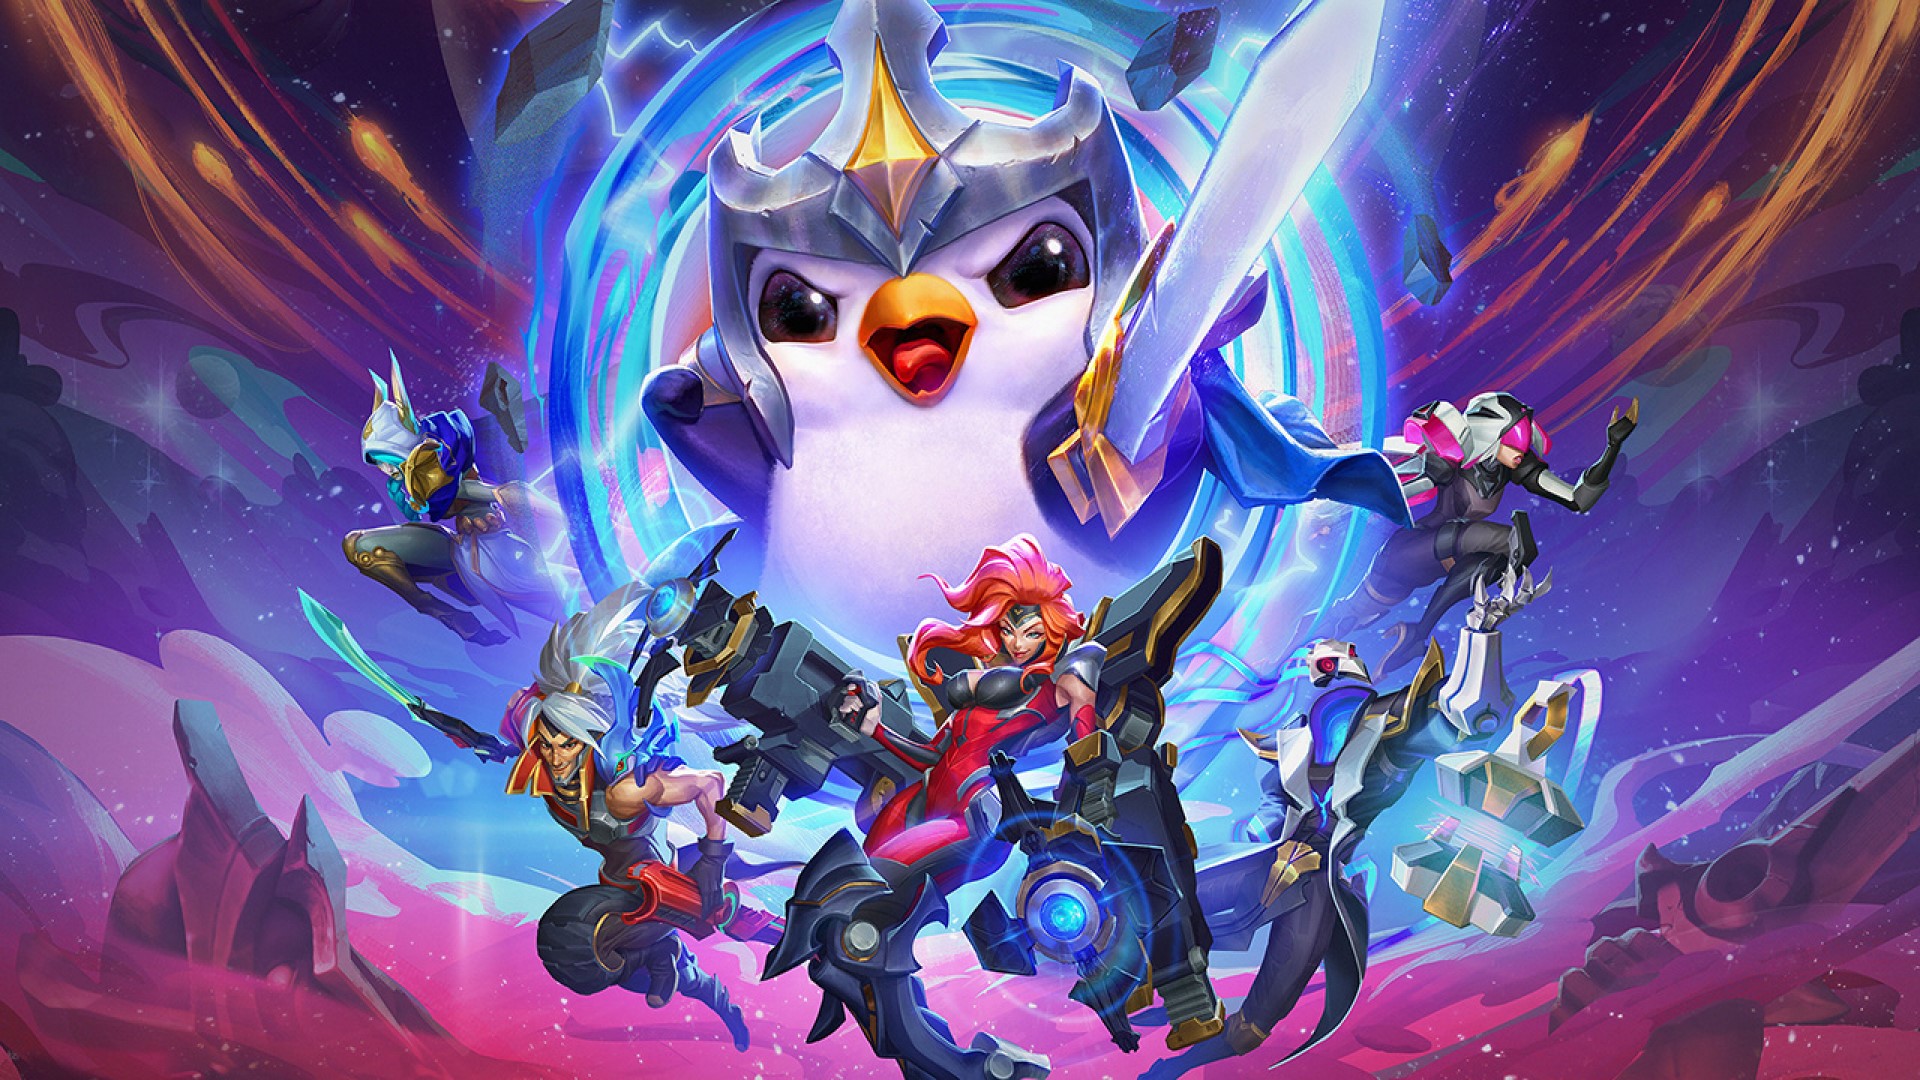 Best mobile multiplayer games: Teamfight Tactics. Image shows a group of fighters centred around a giant penguin.